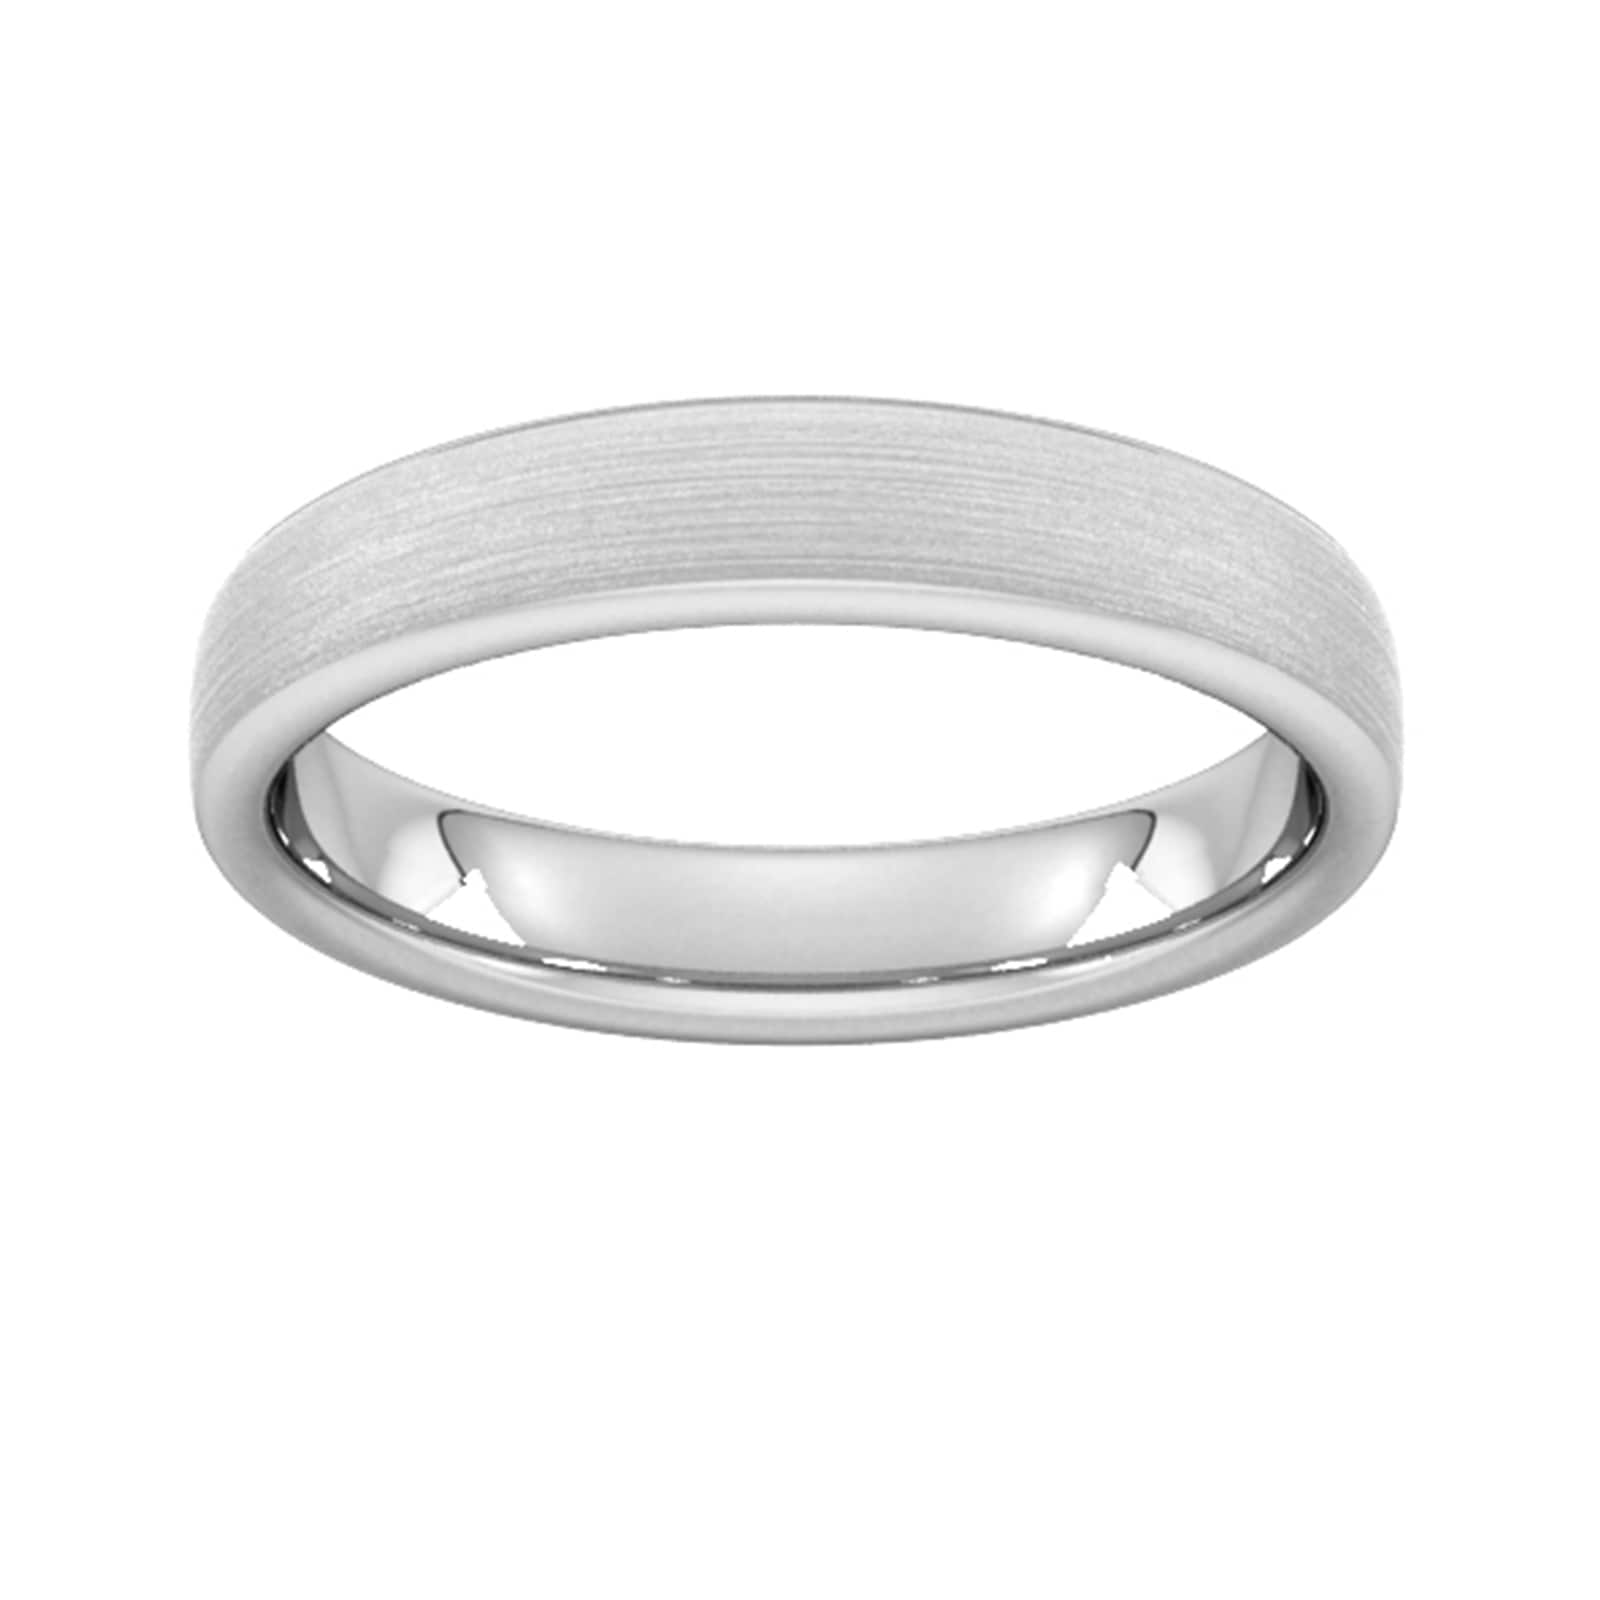 4mm Traditional Court Standard Matt Finished Wedding Ring In 18 Carat White Gold - Ring Size M